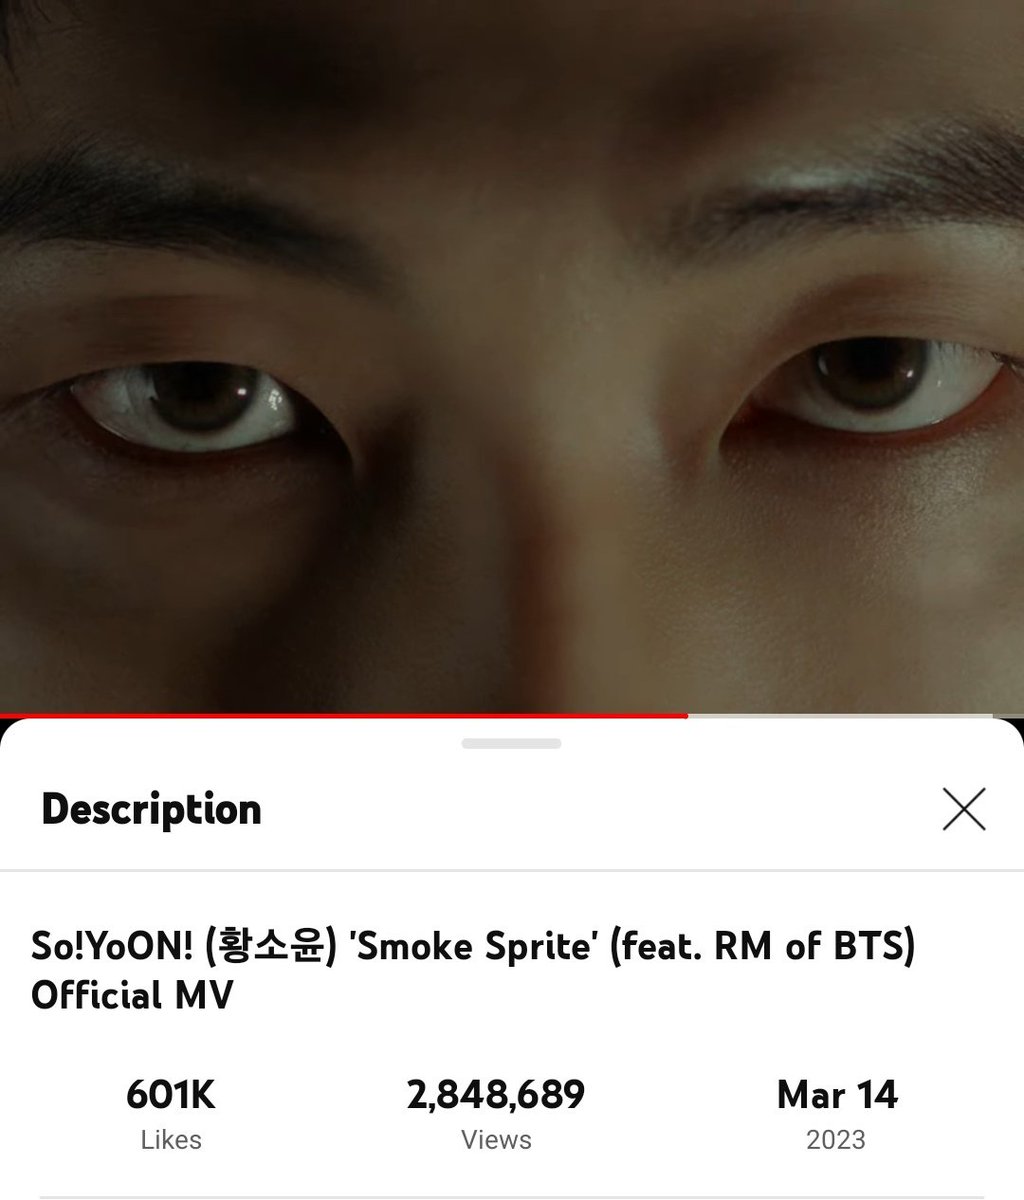 #SmokeSpriteftRM 
#SmokeSpritexRM 
#SmokeSprite_D1 

Hello 💜
If you got tagged, you must QRT this with your SS Streaming on YT 
don't break this chain and tag 7 moots

@xristinav3095 @rEihOn21 @Momi_armyJK @Chimin710 @RiverGrey07 @Lei05120613 @jiminbabe_95